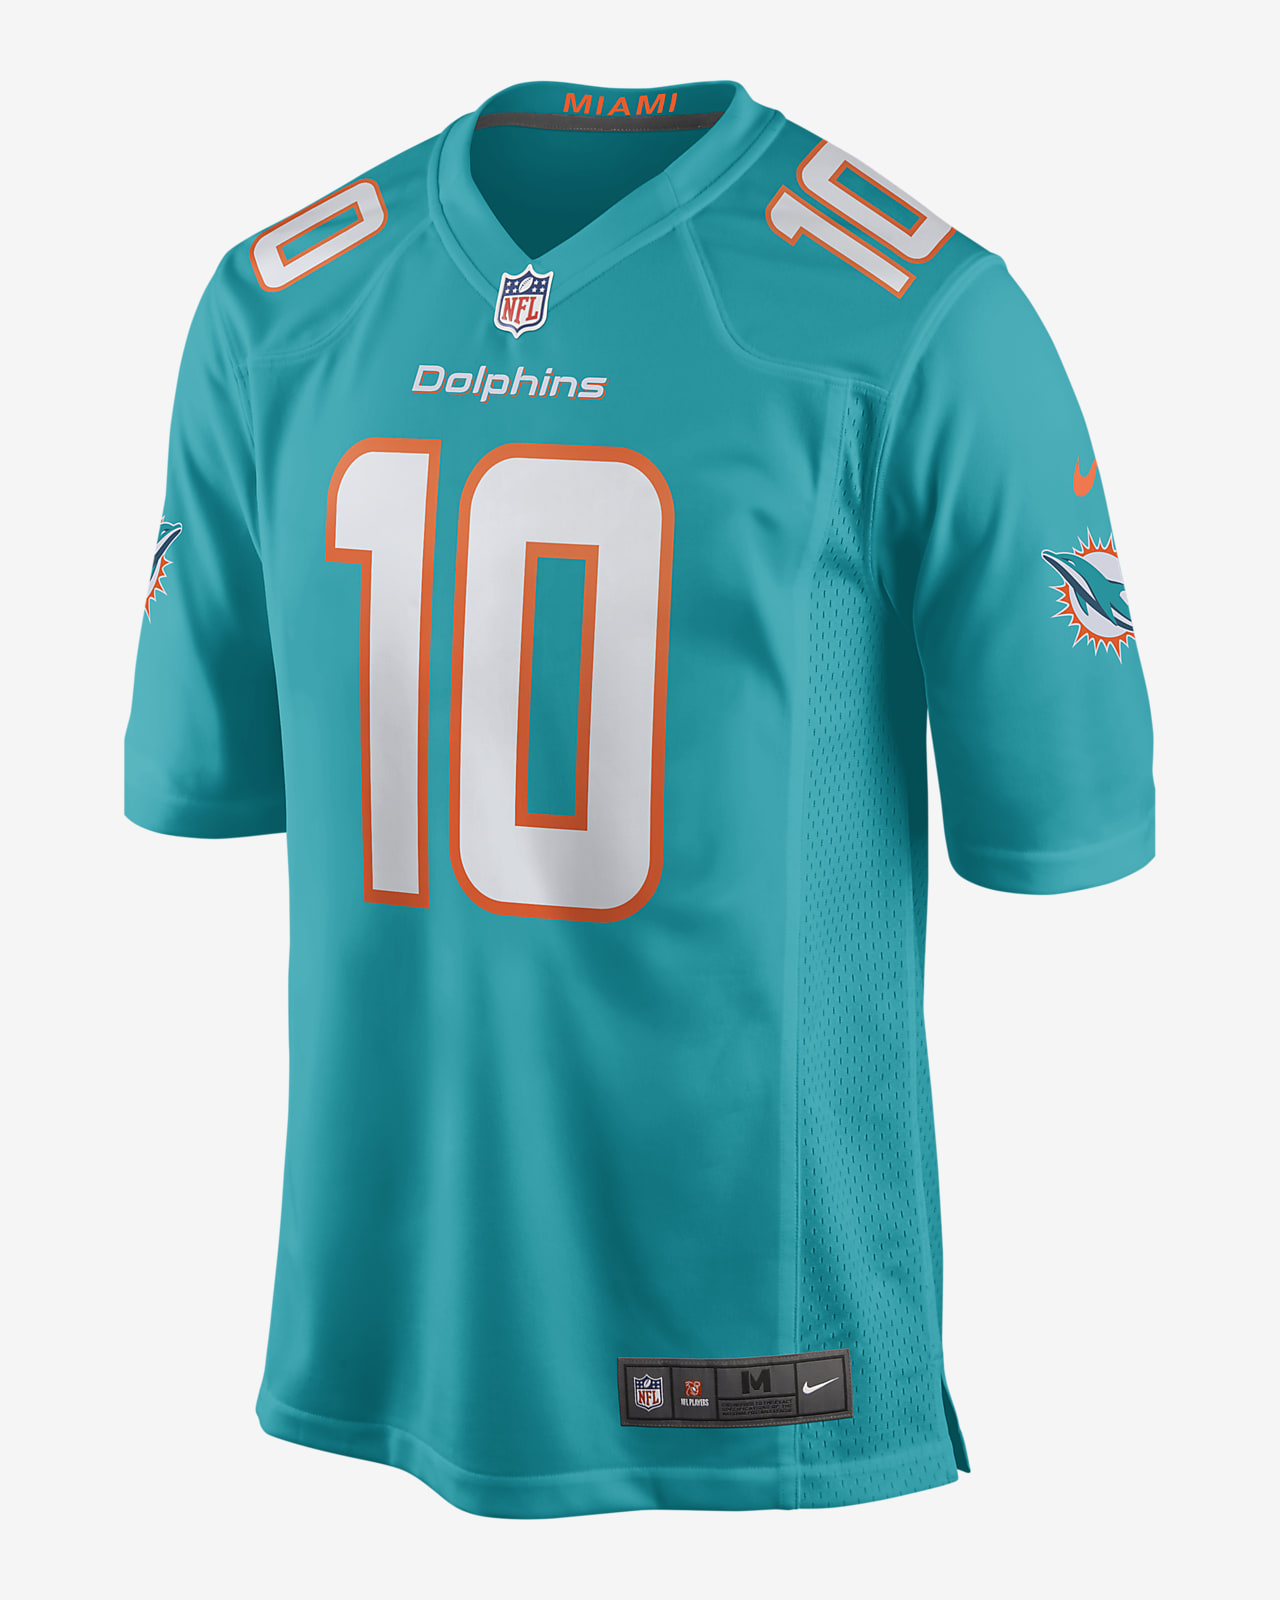 NFL Miami Dolphins (Tyreek Hill) Men's Game Football Jersey.